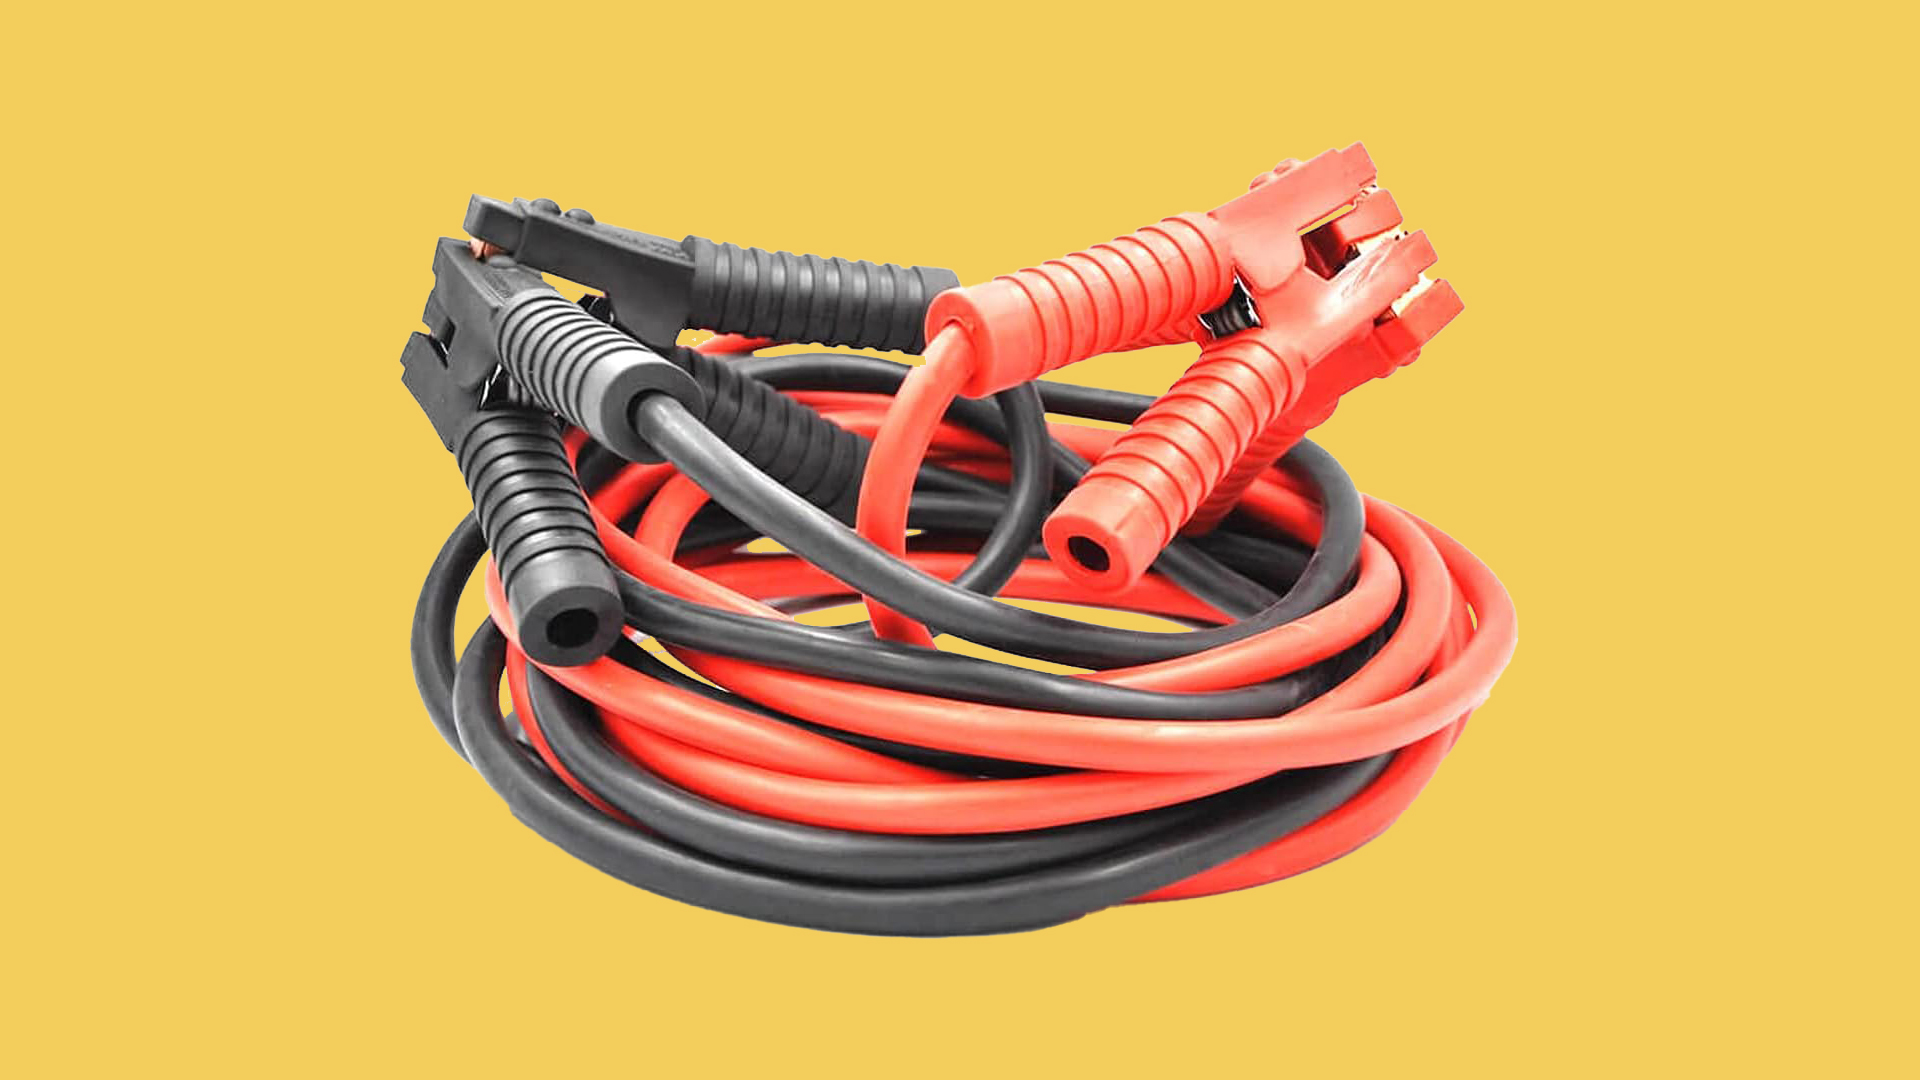 Lil Auto Store Booster Cables